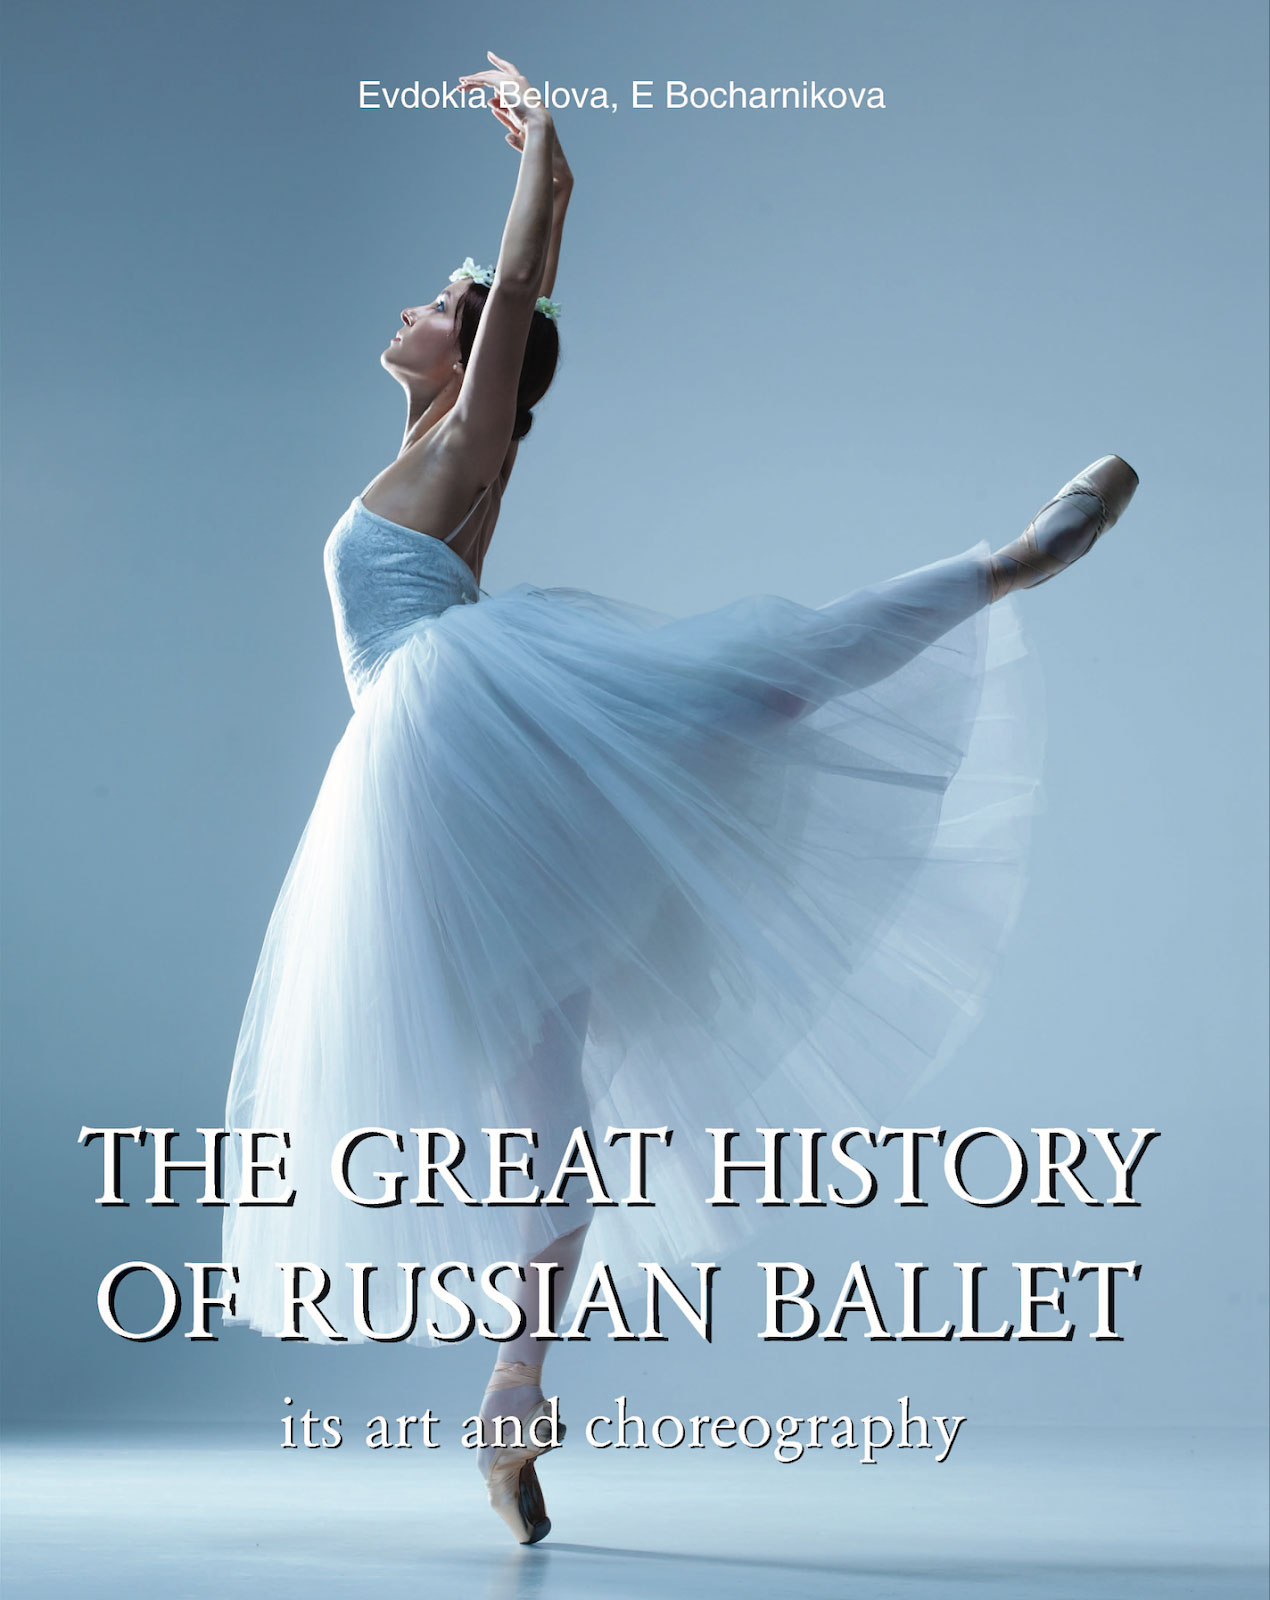 The Great History of Russian Ballet